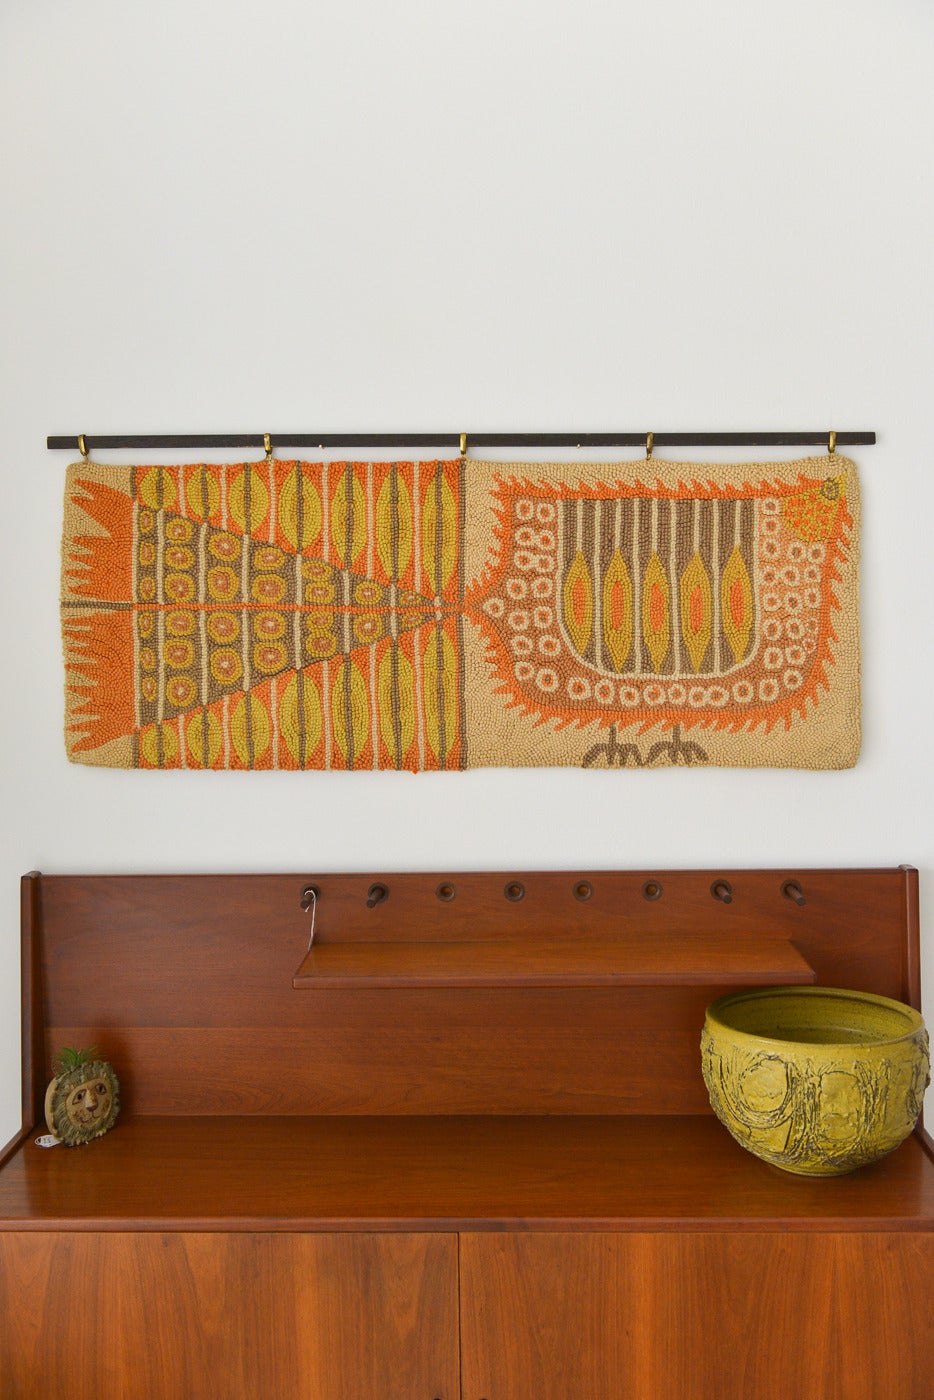 Rare pattern, this beautiful original Evelyn Ackerman hand hooked wool tapestry still retains the original ERA Industries label. A beautiful example of Ackerman’s designs, these beautifully made tapestries were designed by Evelyn in the 50’s and